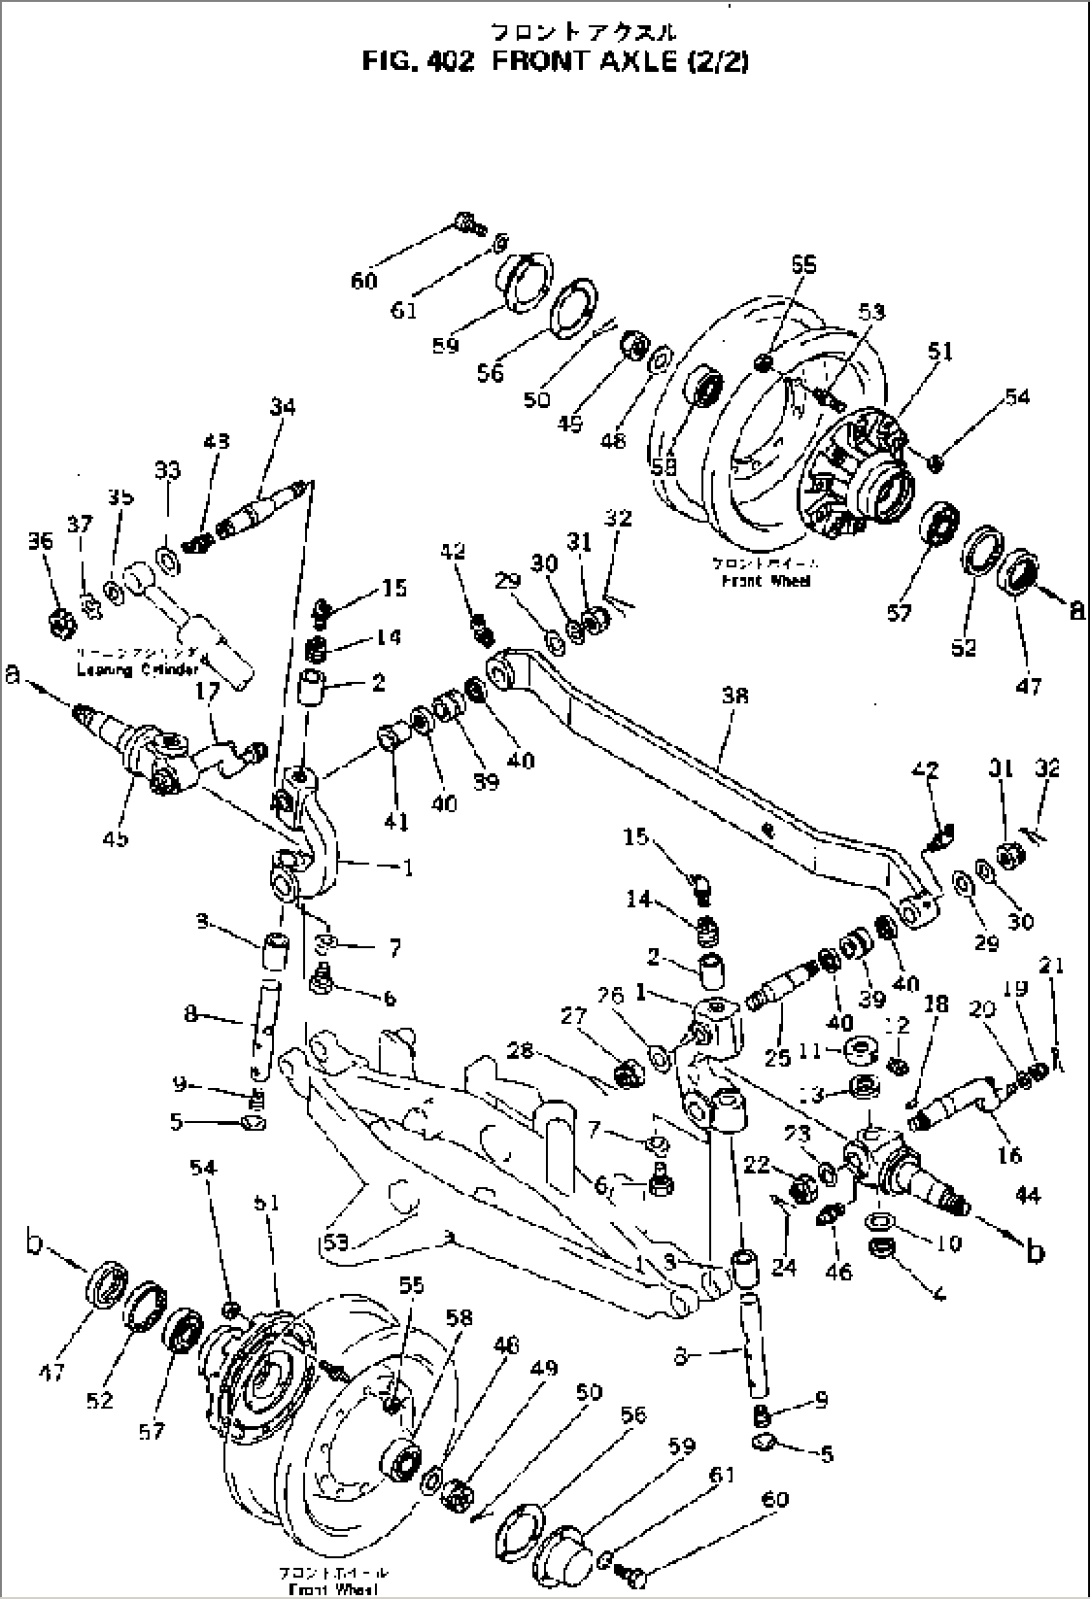 FRONT AXLE (2/2)